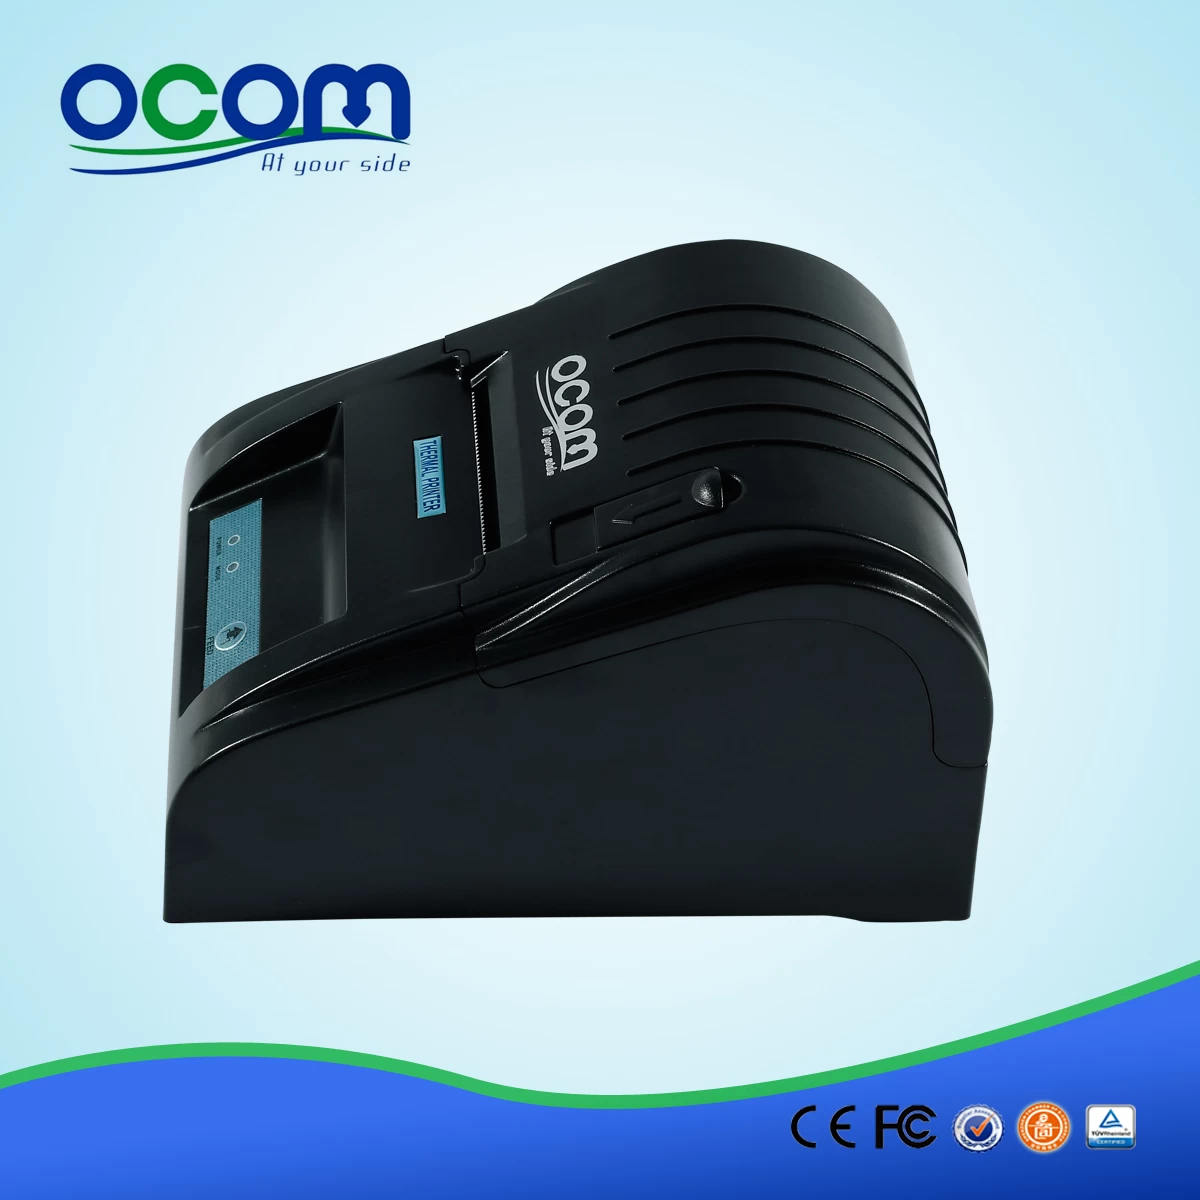 China made cheap Android 58mm thermal receipt printer-OCPP-585